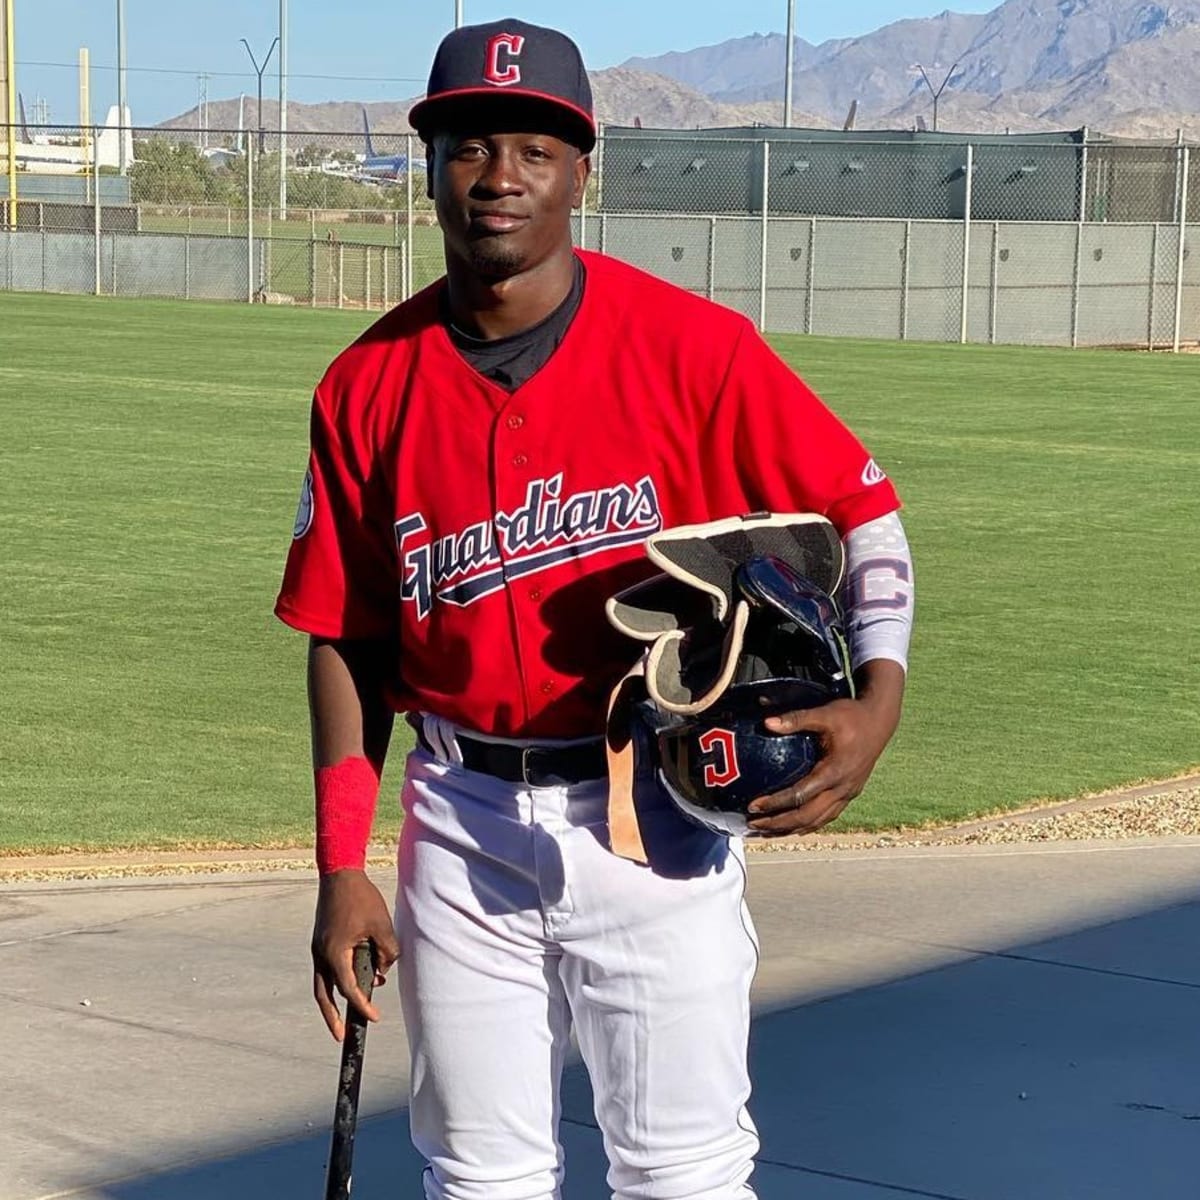 San Diego Padres Top 50 Prospects (2023)